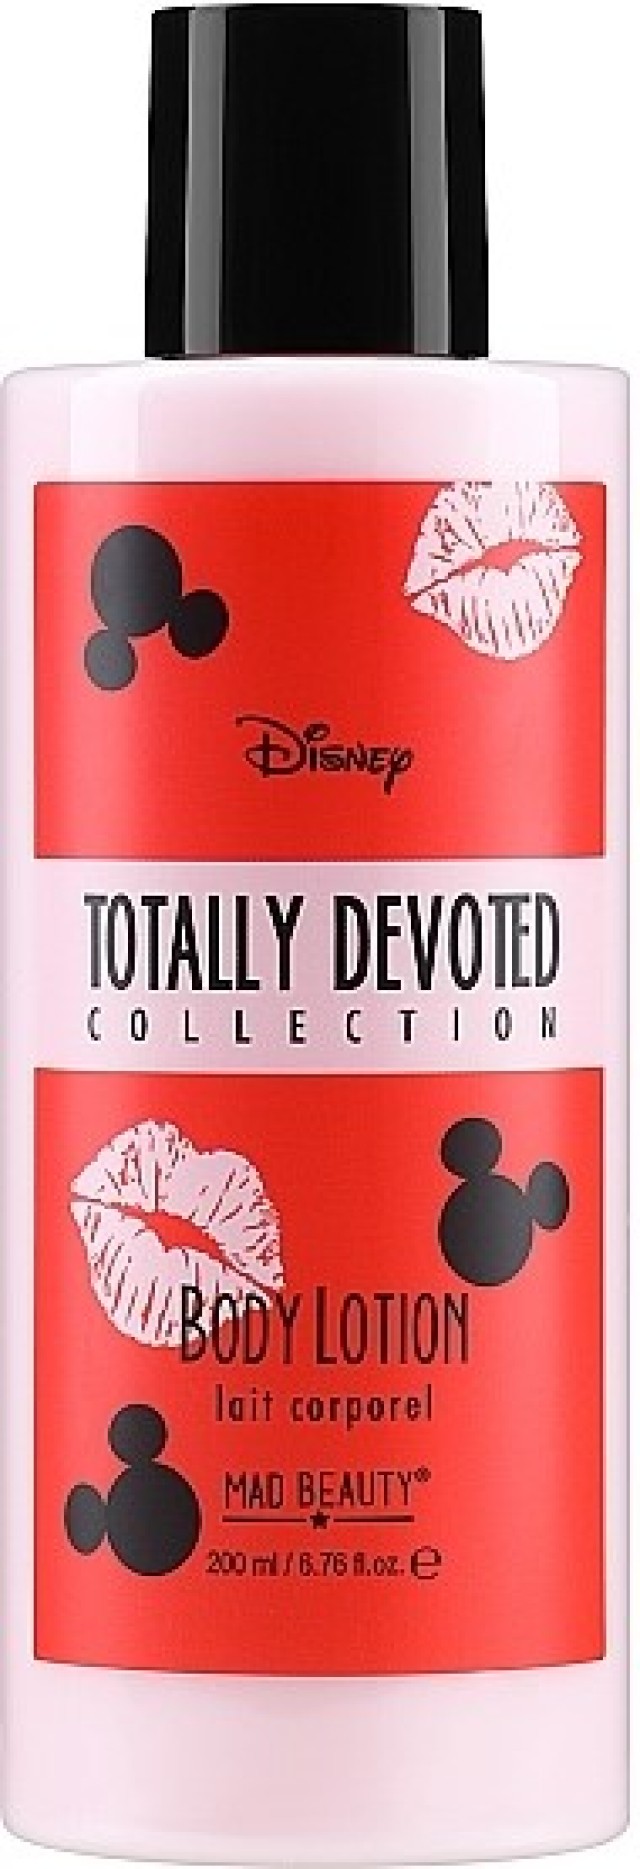 Mad Beauty Totally Devoted Collection Body Lotion 200ml